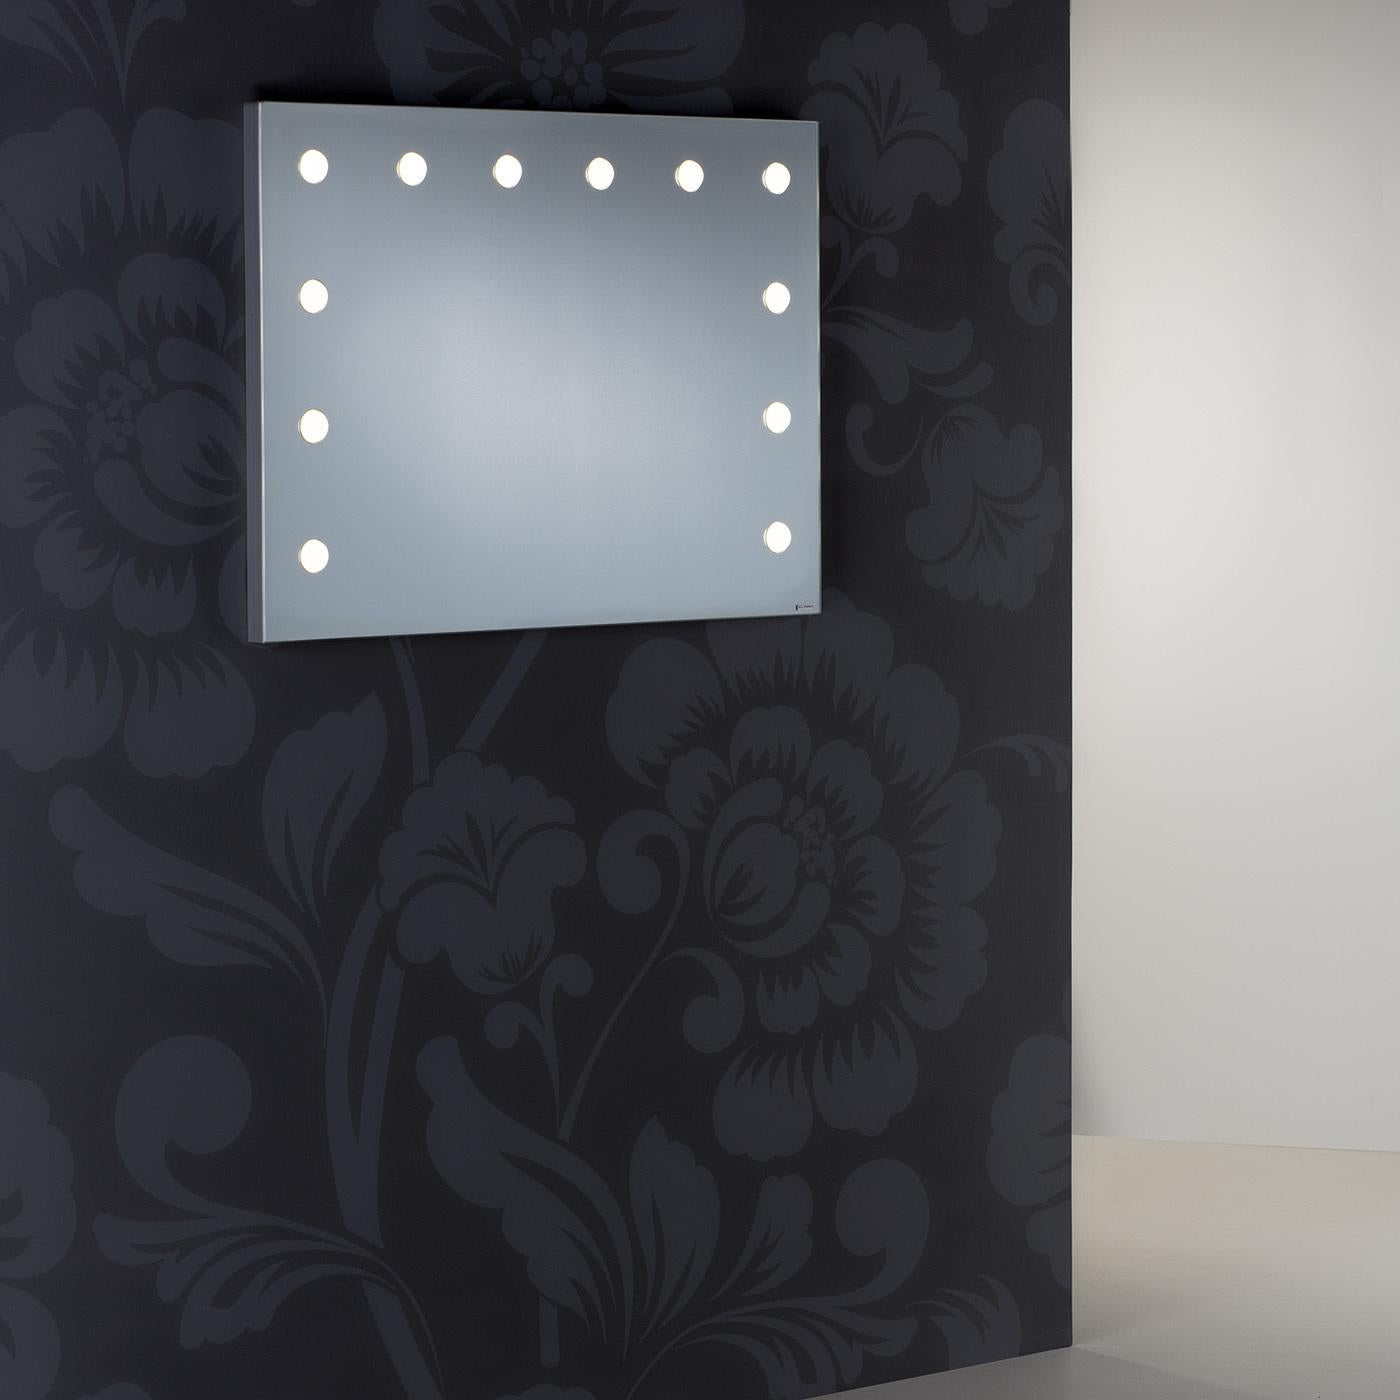 A captivating mix of glamor, innovation, and Italian design, this backstage-style mirror from the MDE series is distinguished for its extra-slim profile. The 4cm-thick silver anodized aluminum frame is embellished with 12 high-refraction opalescent